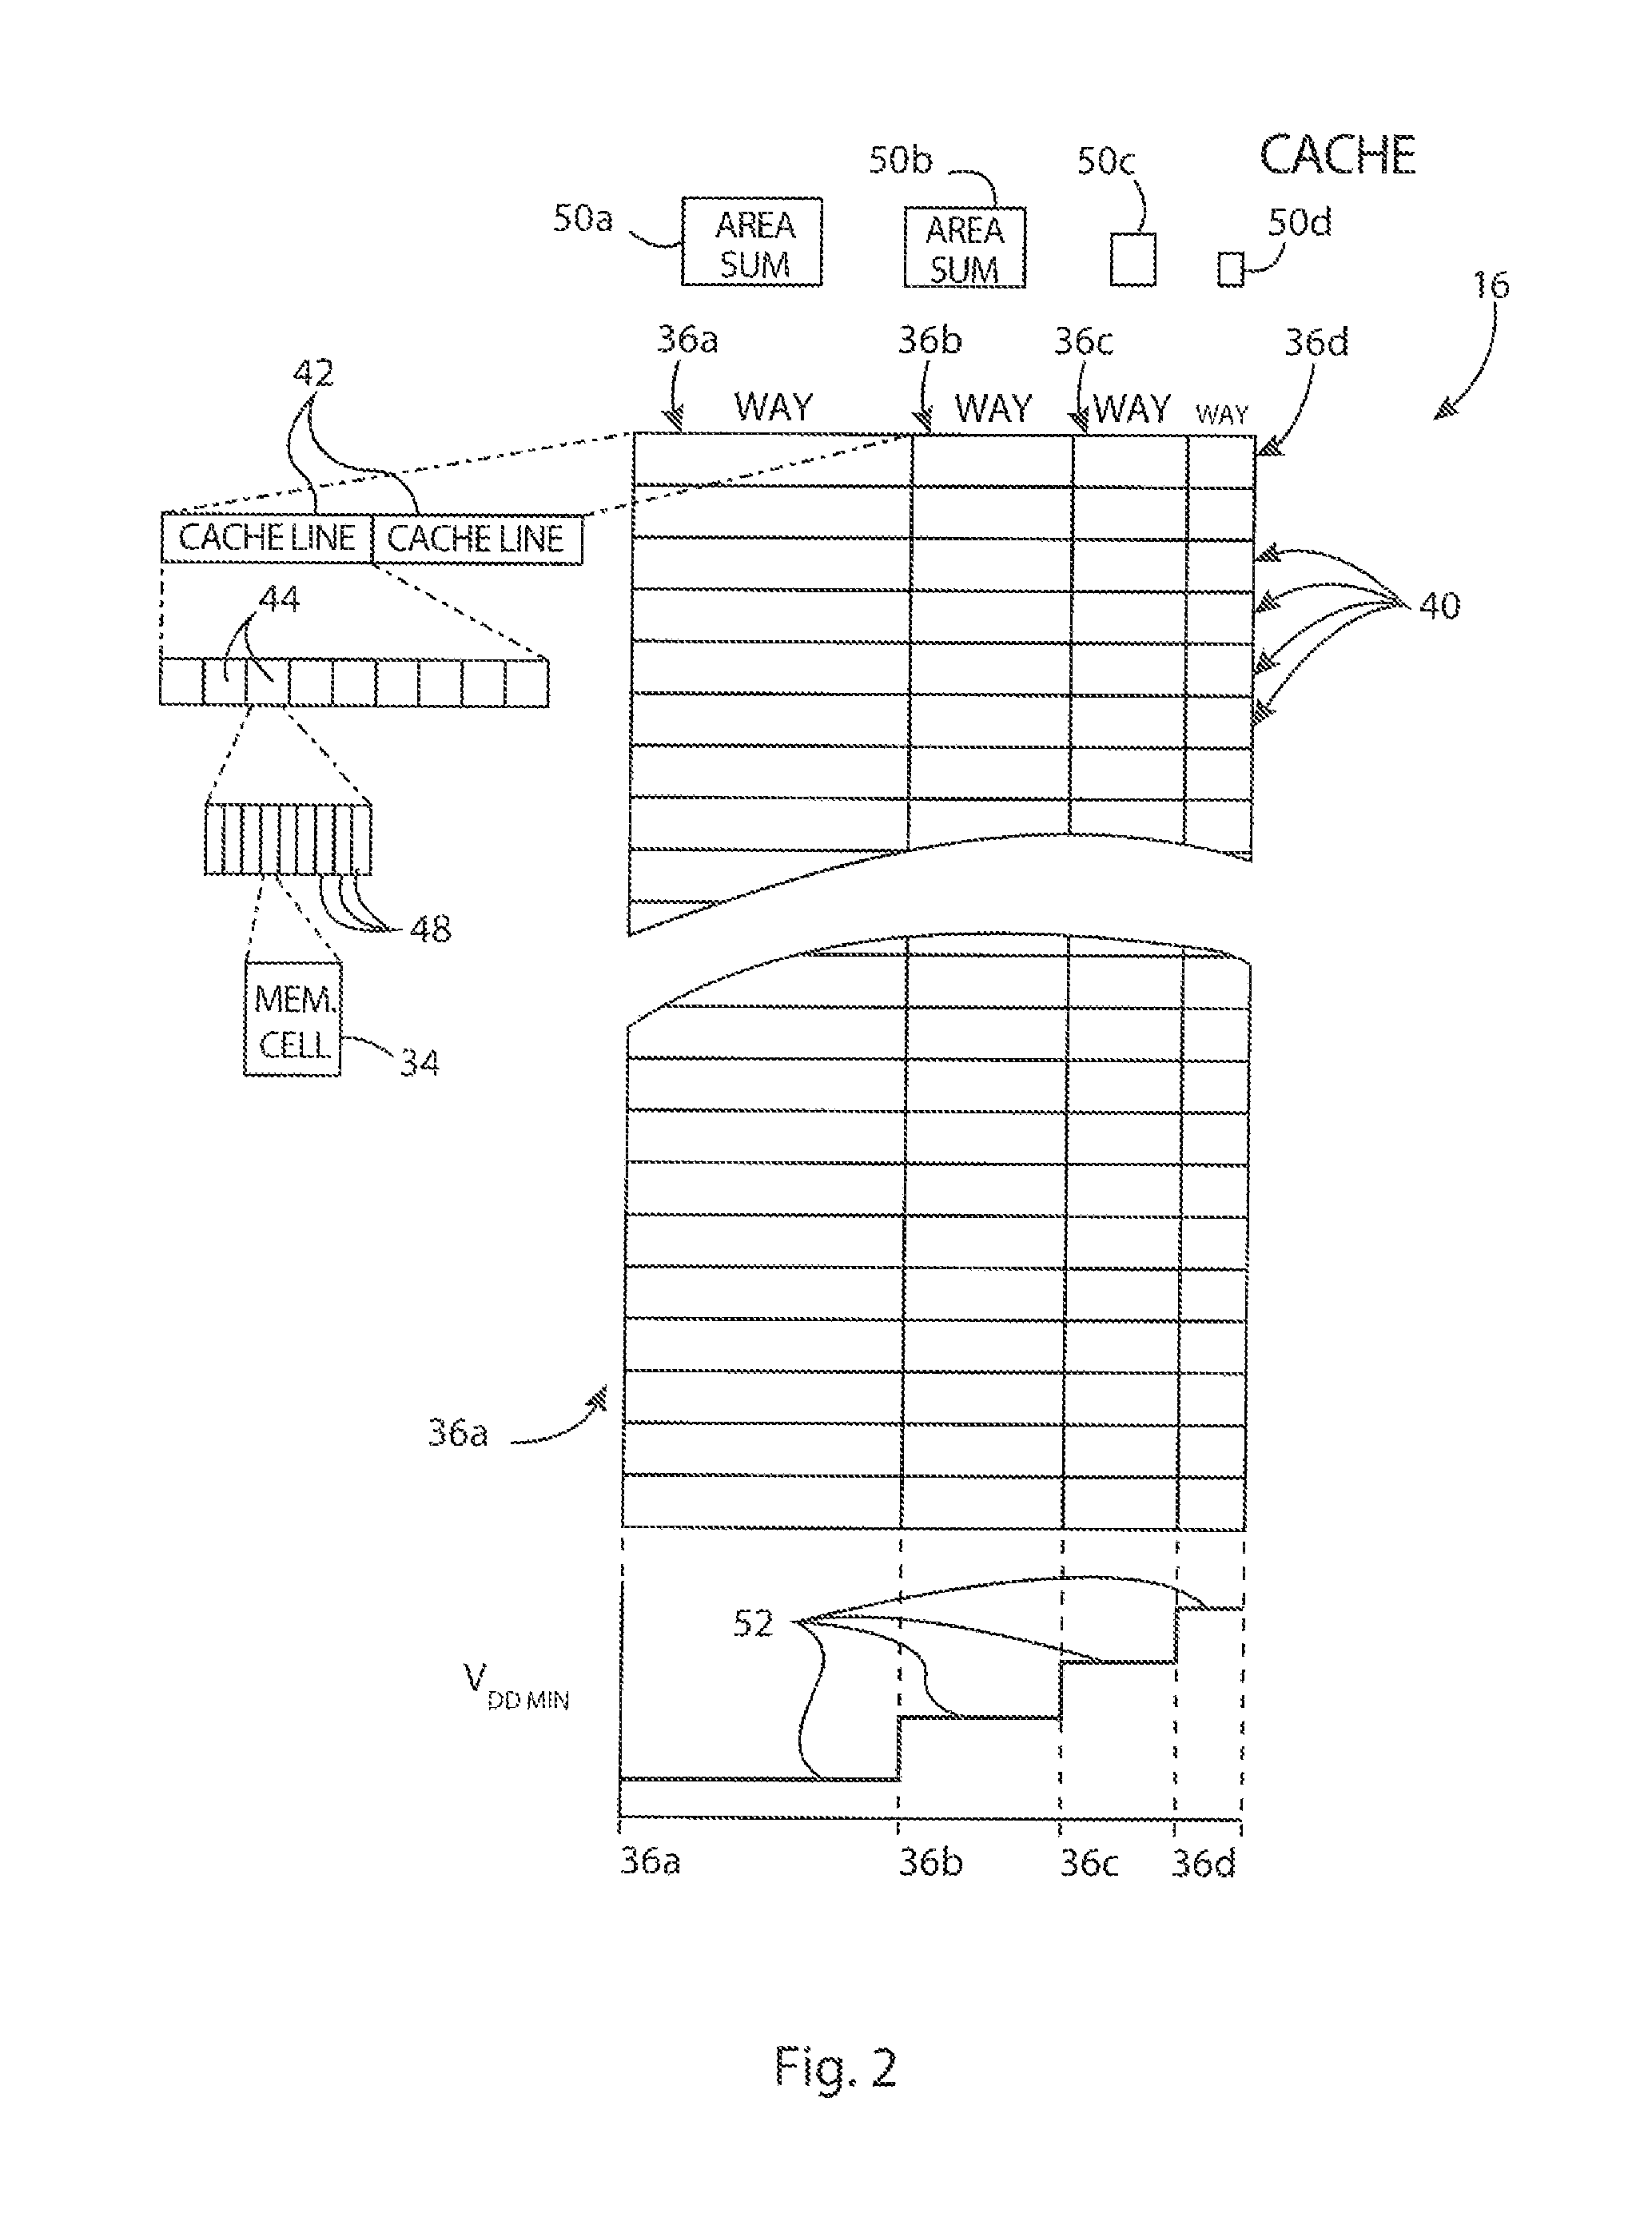 Dynamic error handling for on-chip memory structures